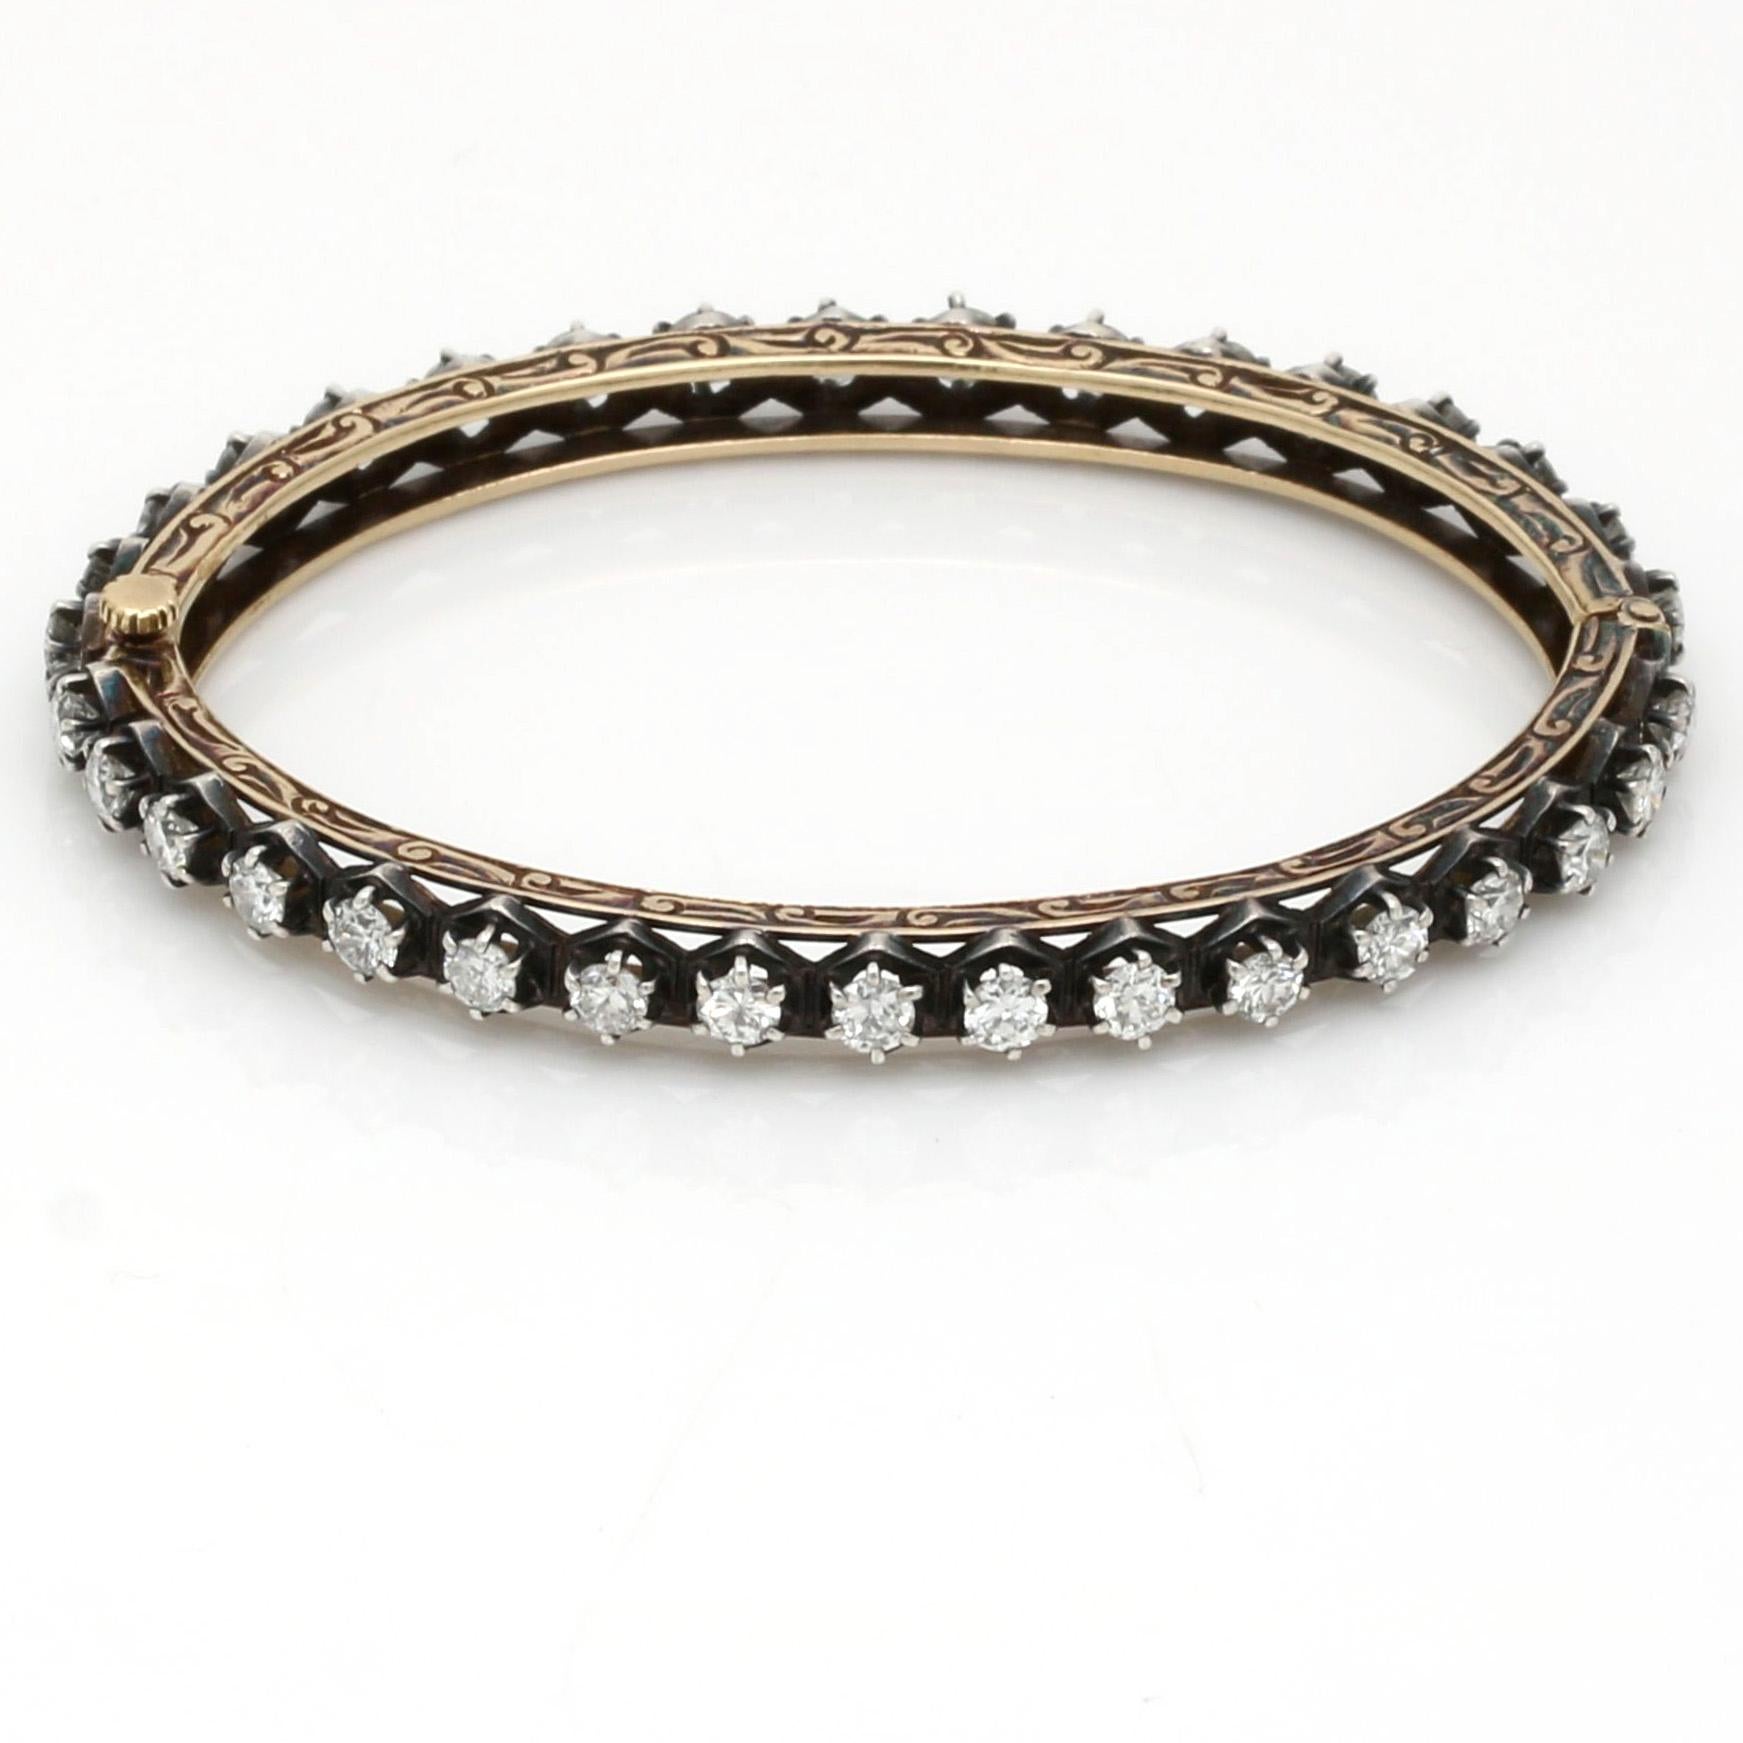 This classic hinged bracelet adds a hint of vintage glamour to your everyday wardrobe. It's set with 35 sparkling round diamonds and crafted from antique-finished 18k gold, lending it an authentically antique feel. An ideal complement to any look,